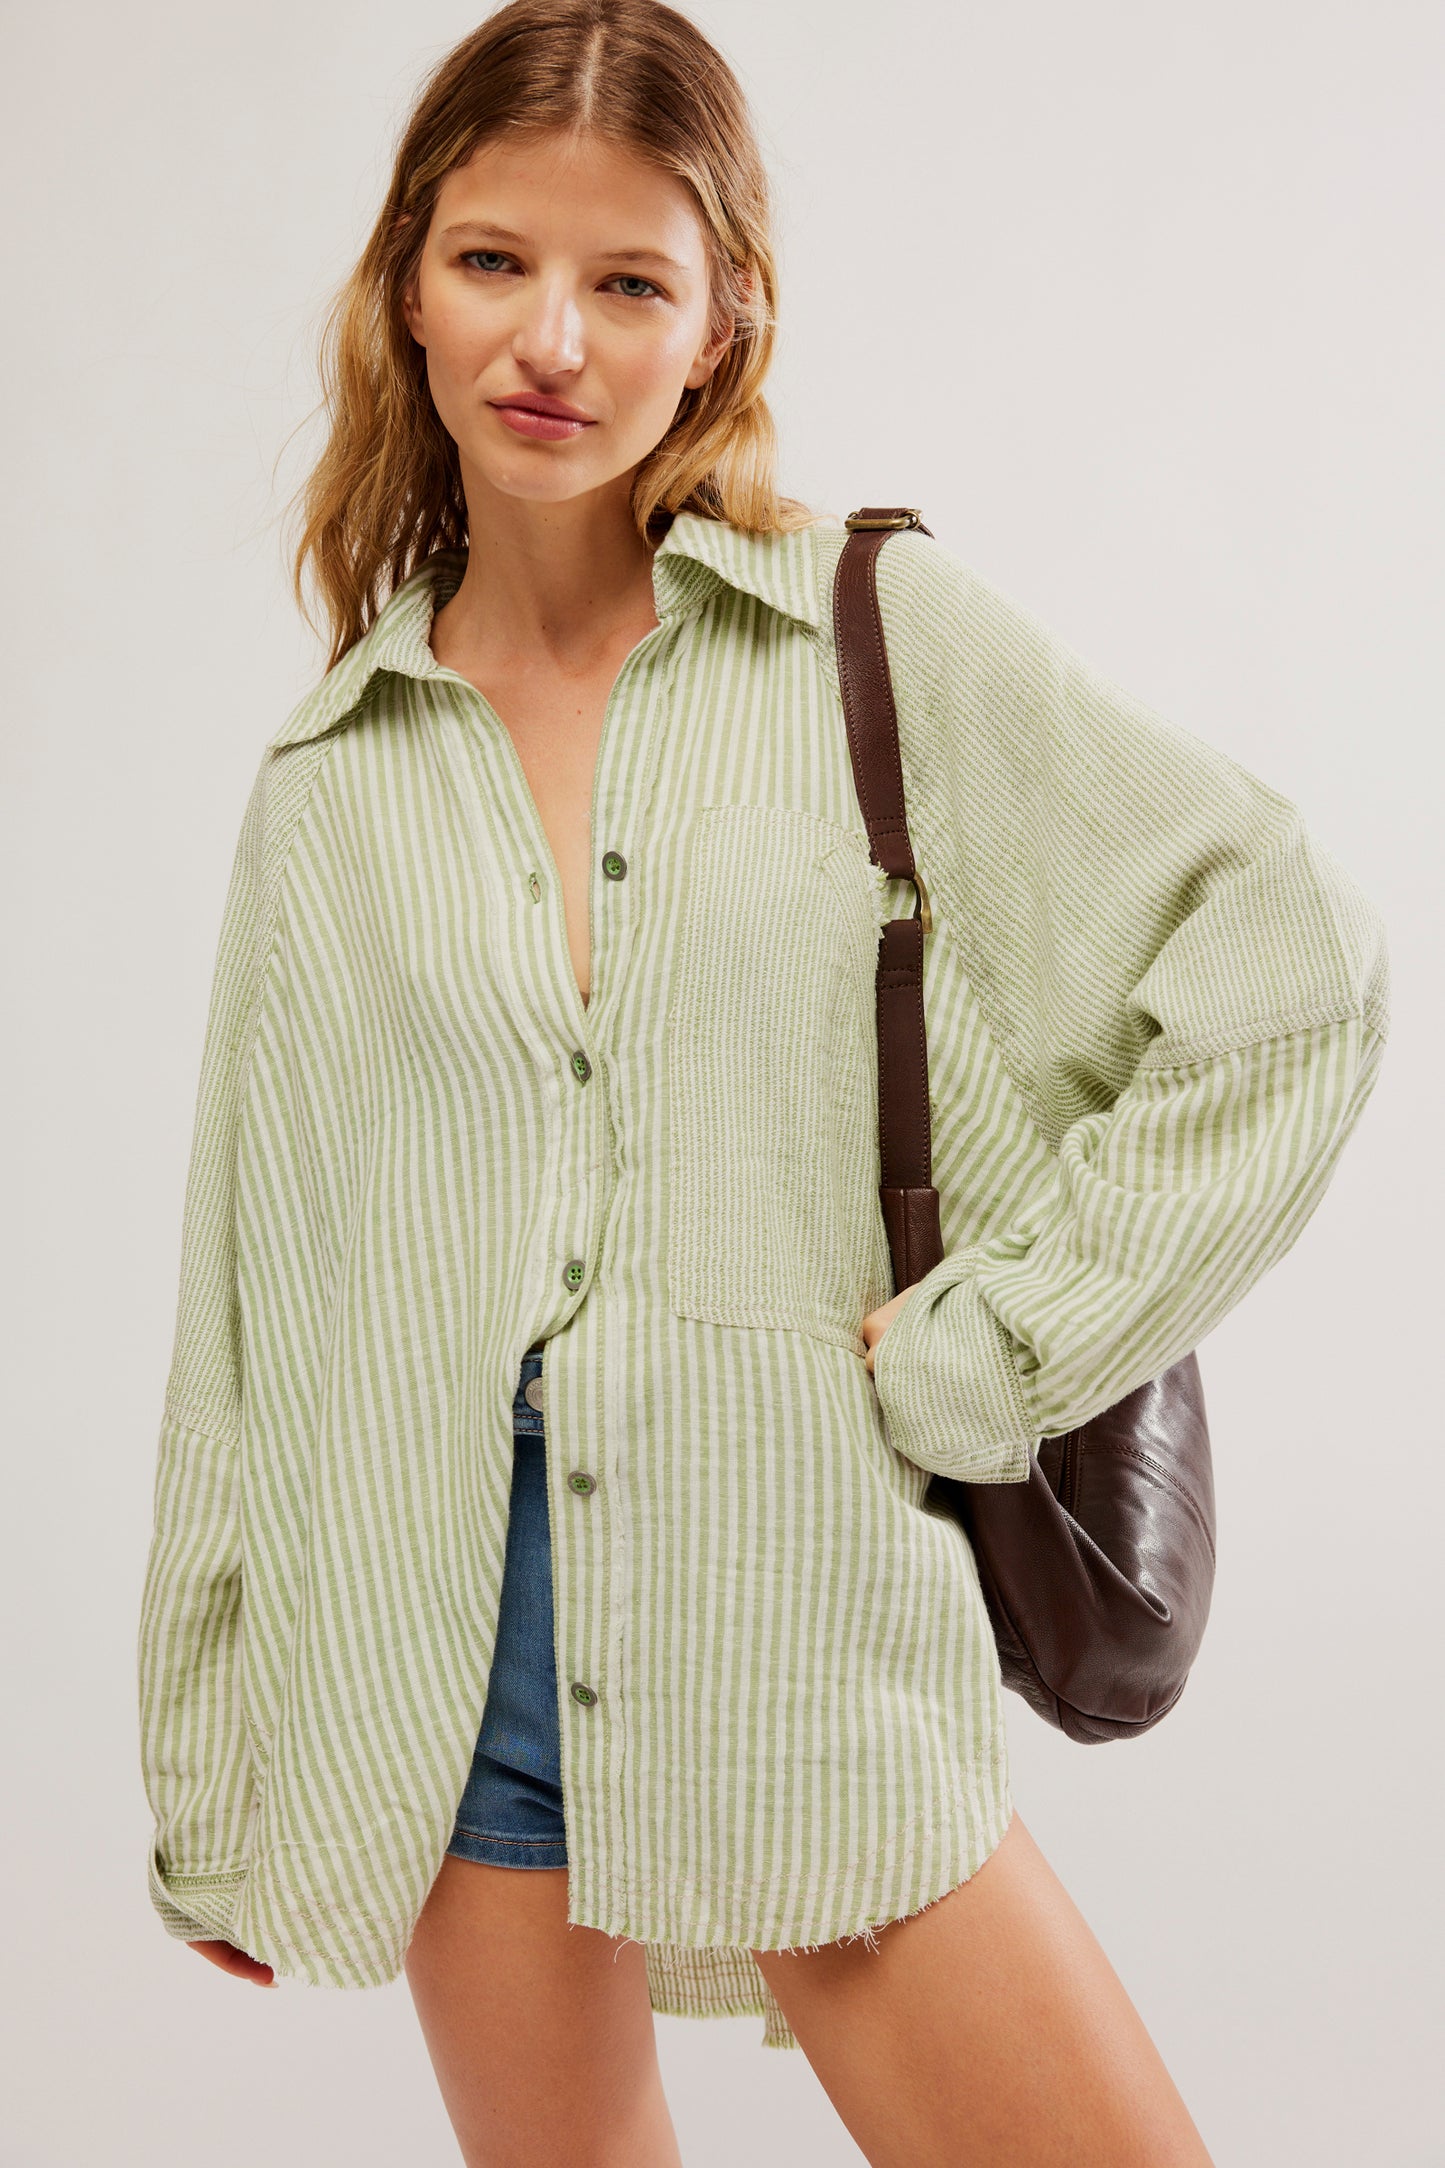 Front view of the Free People Indigo Skies Striped Shirt in the color Sage Combo